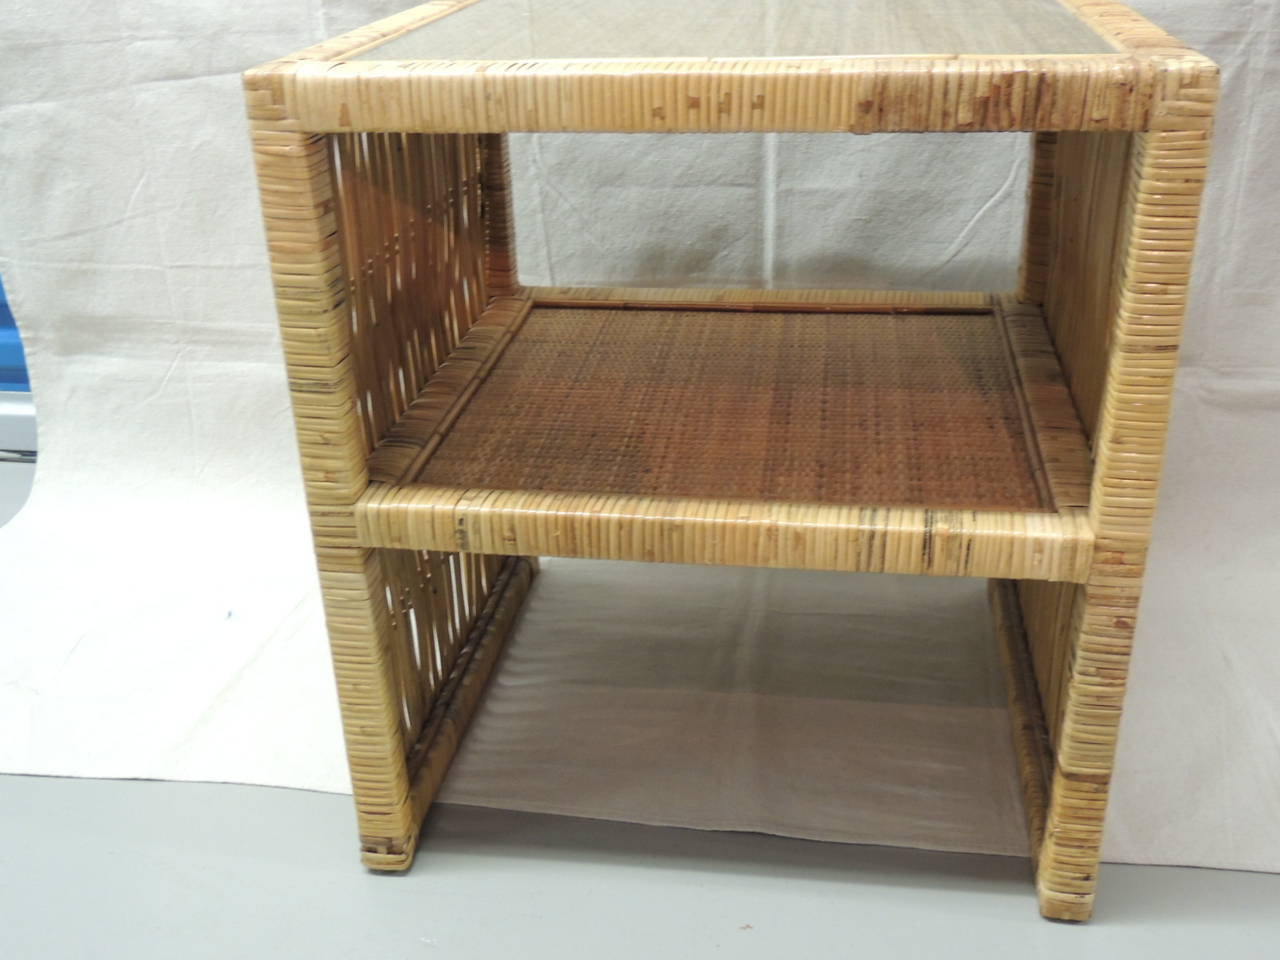 Vintage rattan and wicker square side table with clear glass inset top. Middle shelf. Basket weave deign on shelves tops.